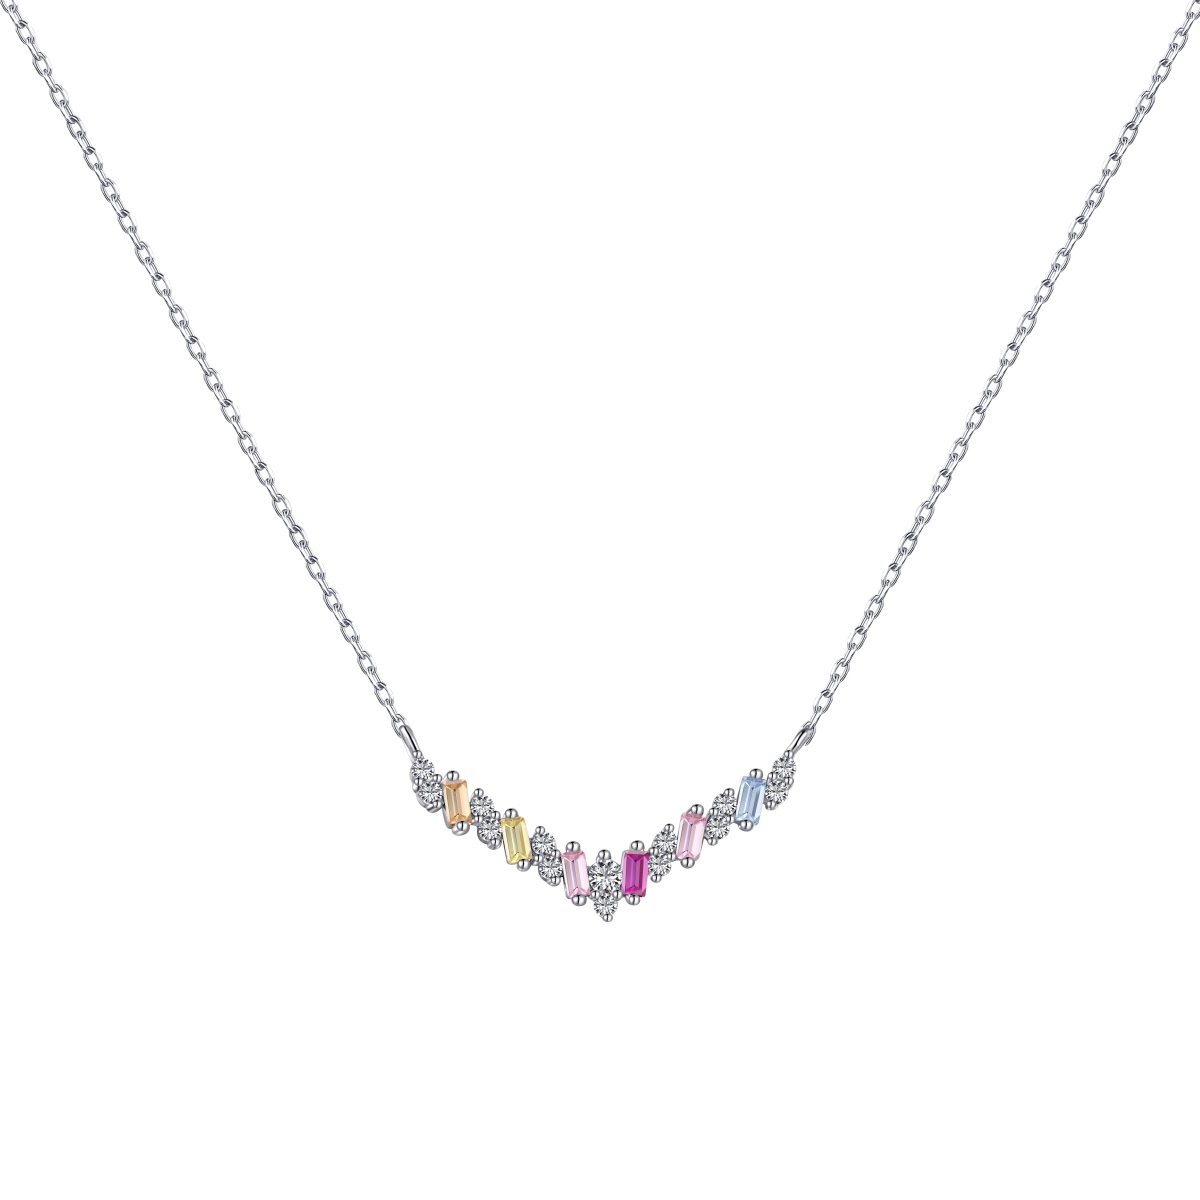 Rainbow Delicate V Pendant Sterling Silver Necklace